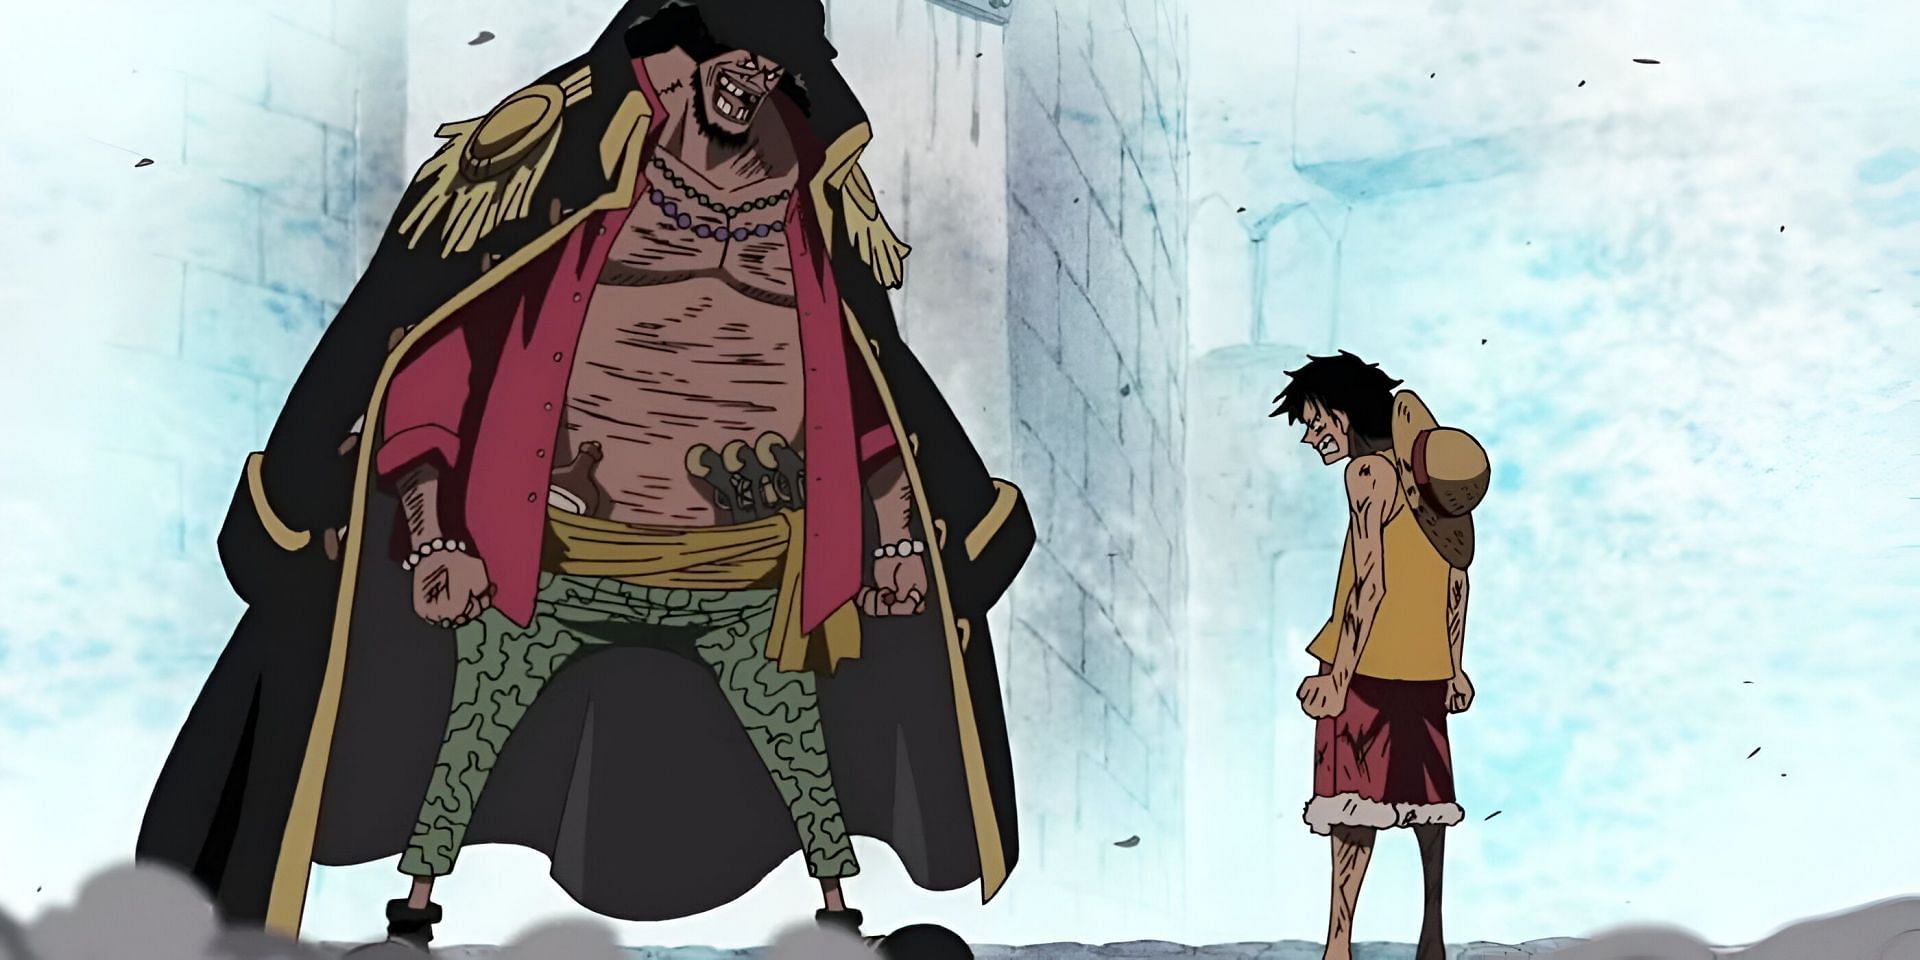 Blackbeard (left) and Luffy (right) about to engage in combat (Image via Toei Animation)